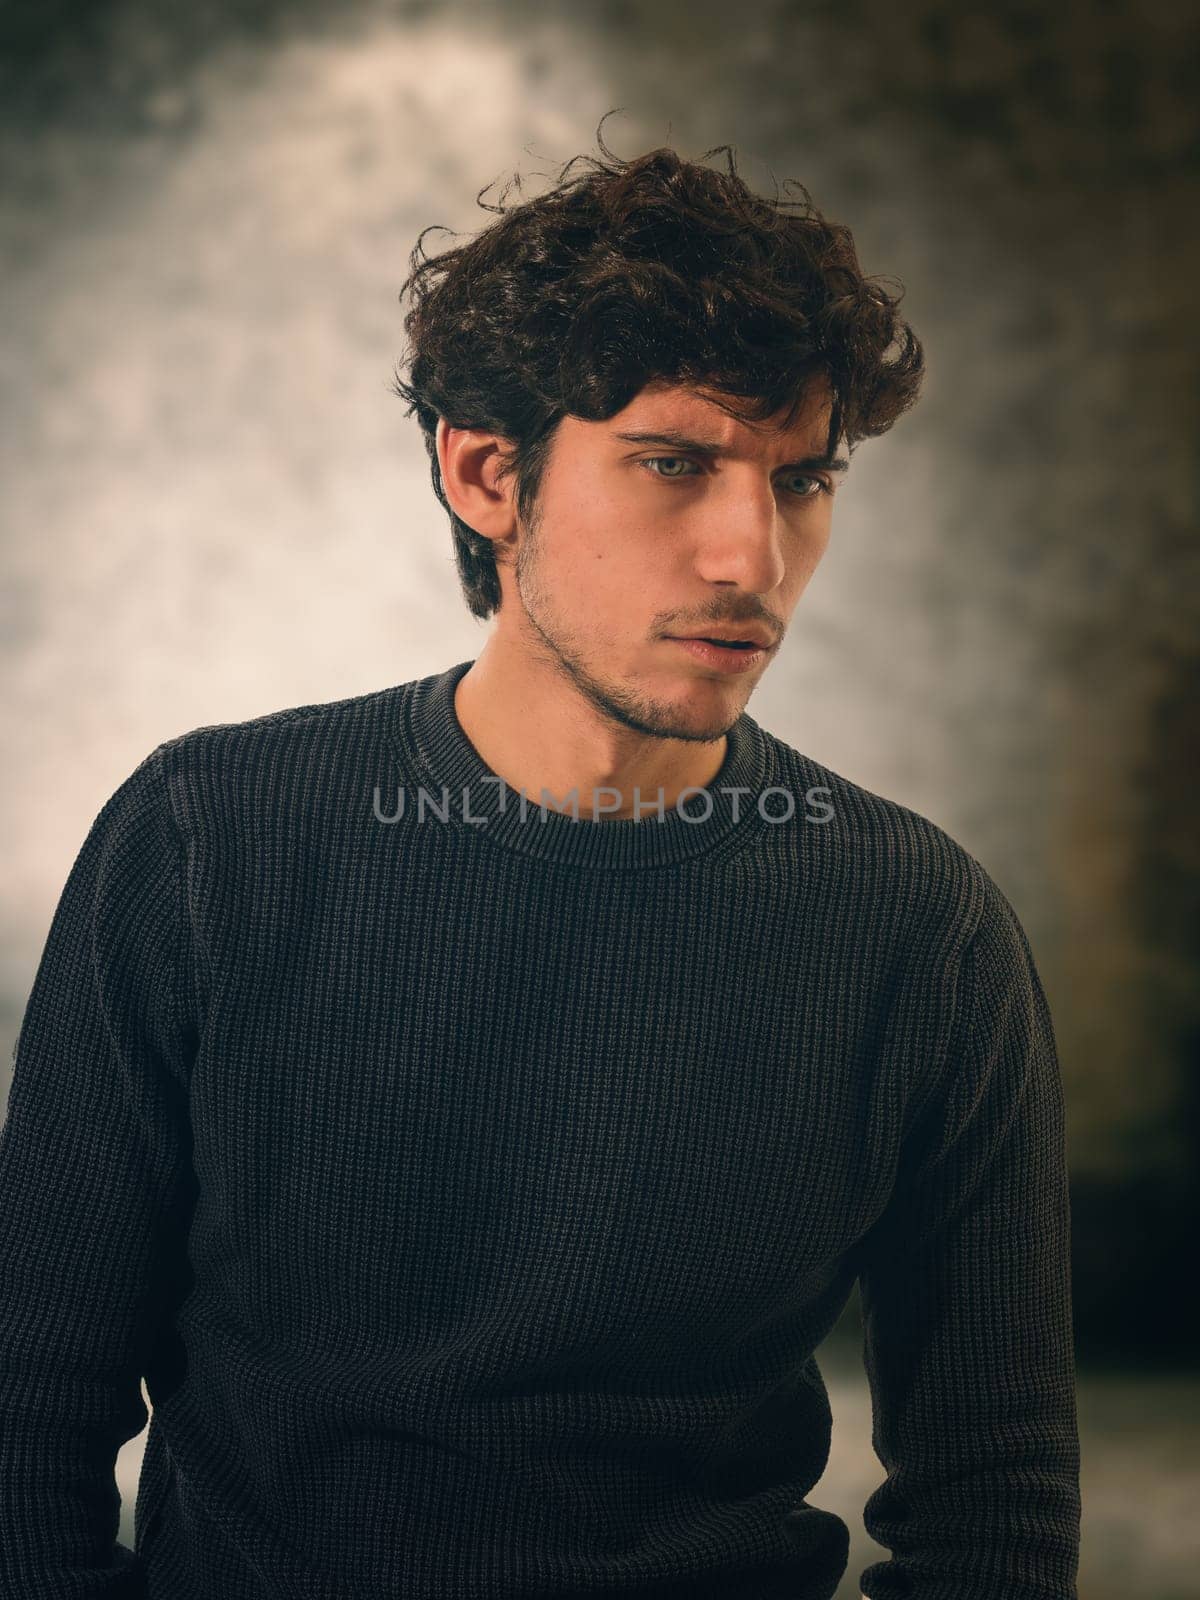 A Stylish Man in a Black Sweater Strikes a Pose for a Captivating Portrait by artofphoto